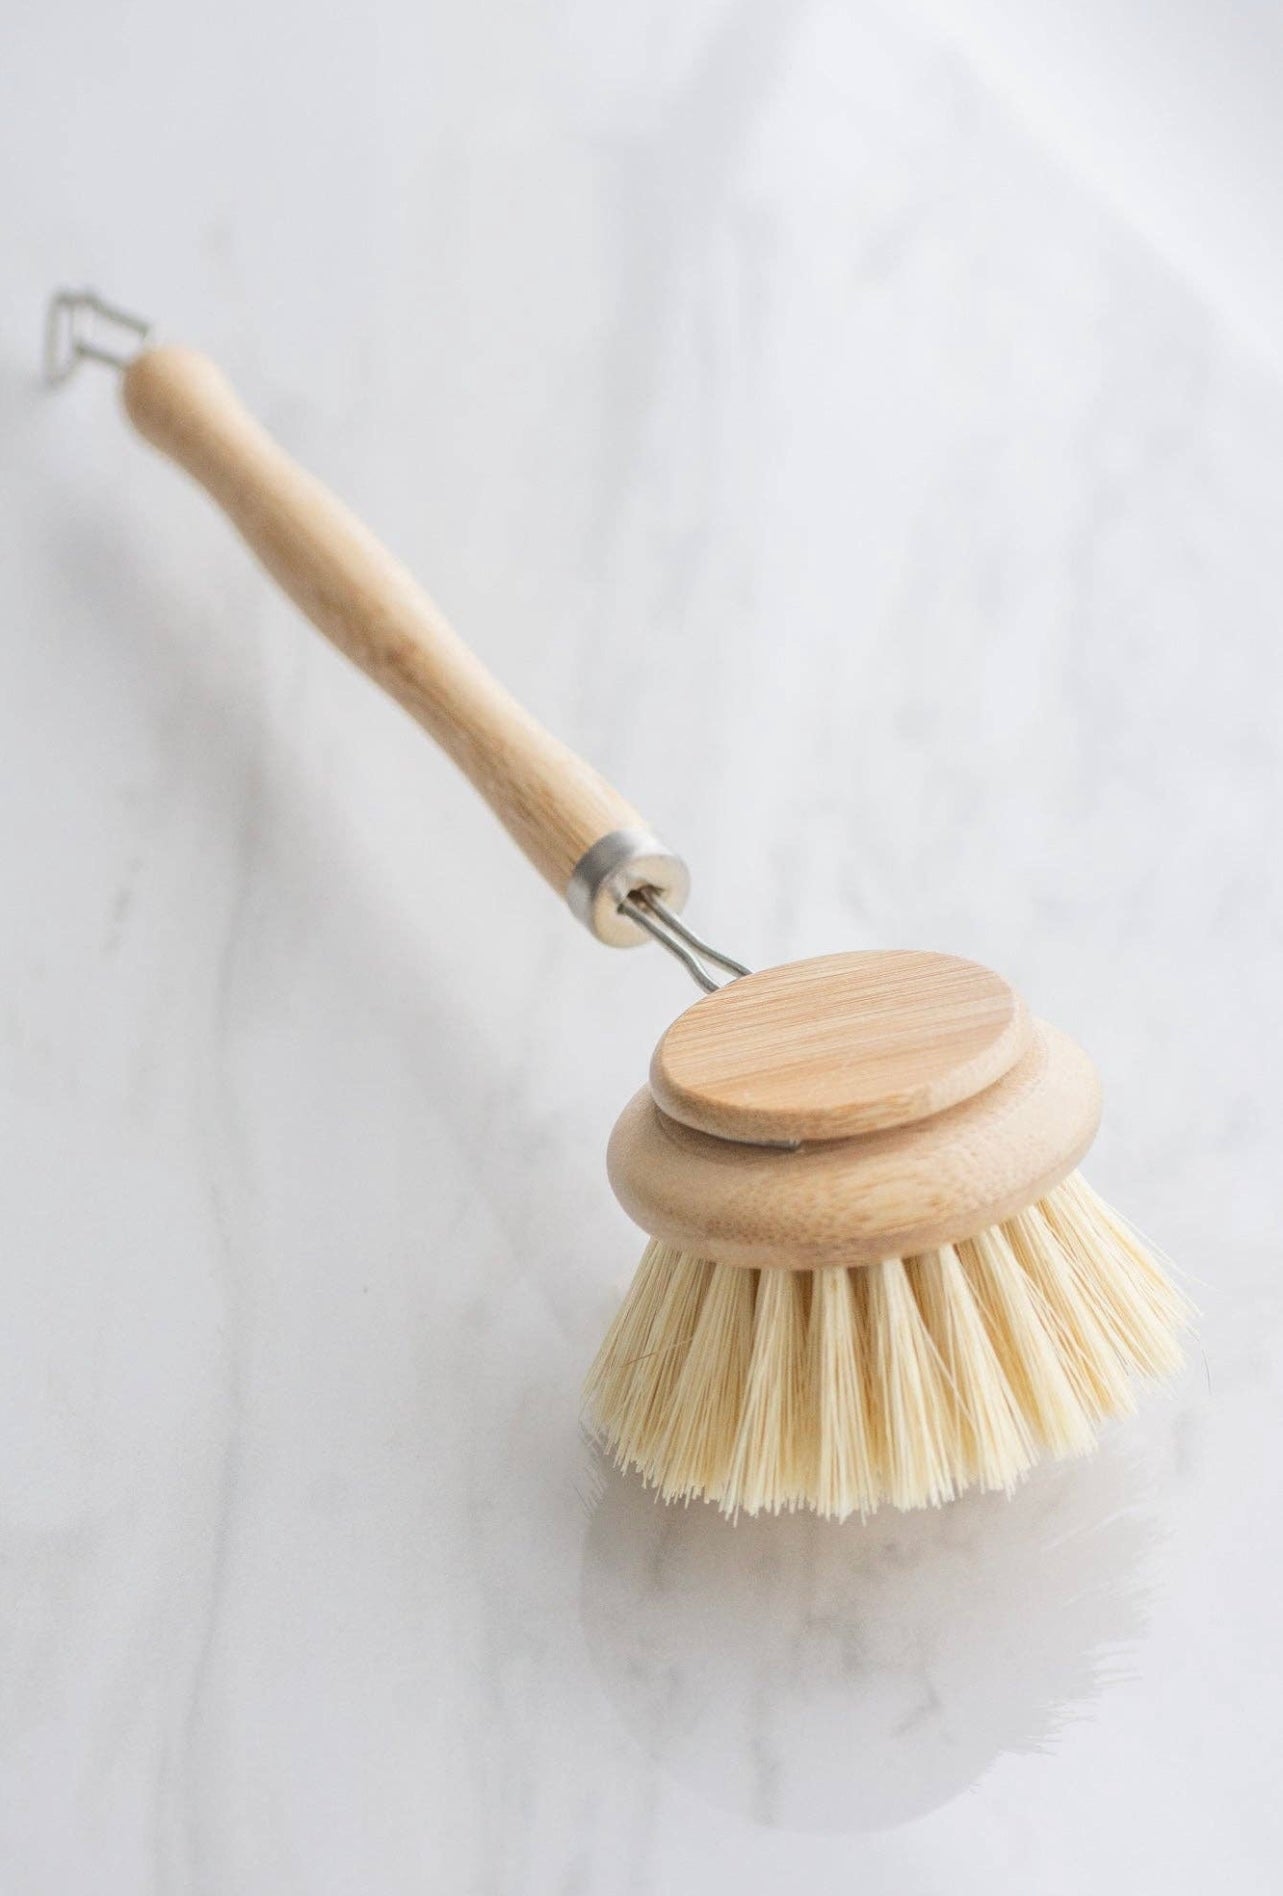 Bamboo Dish Scrub Brushes, Kitchen Wooden Cleaning Scrubbers Set